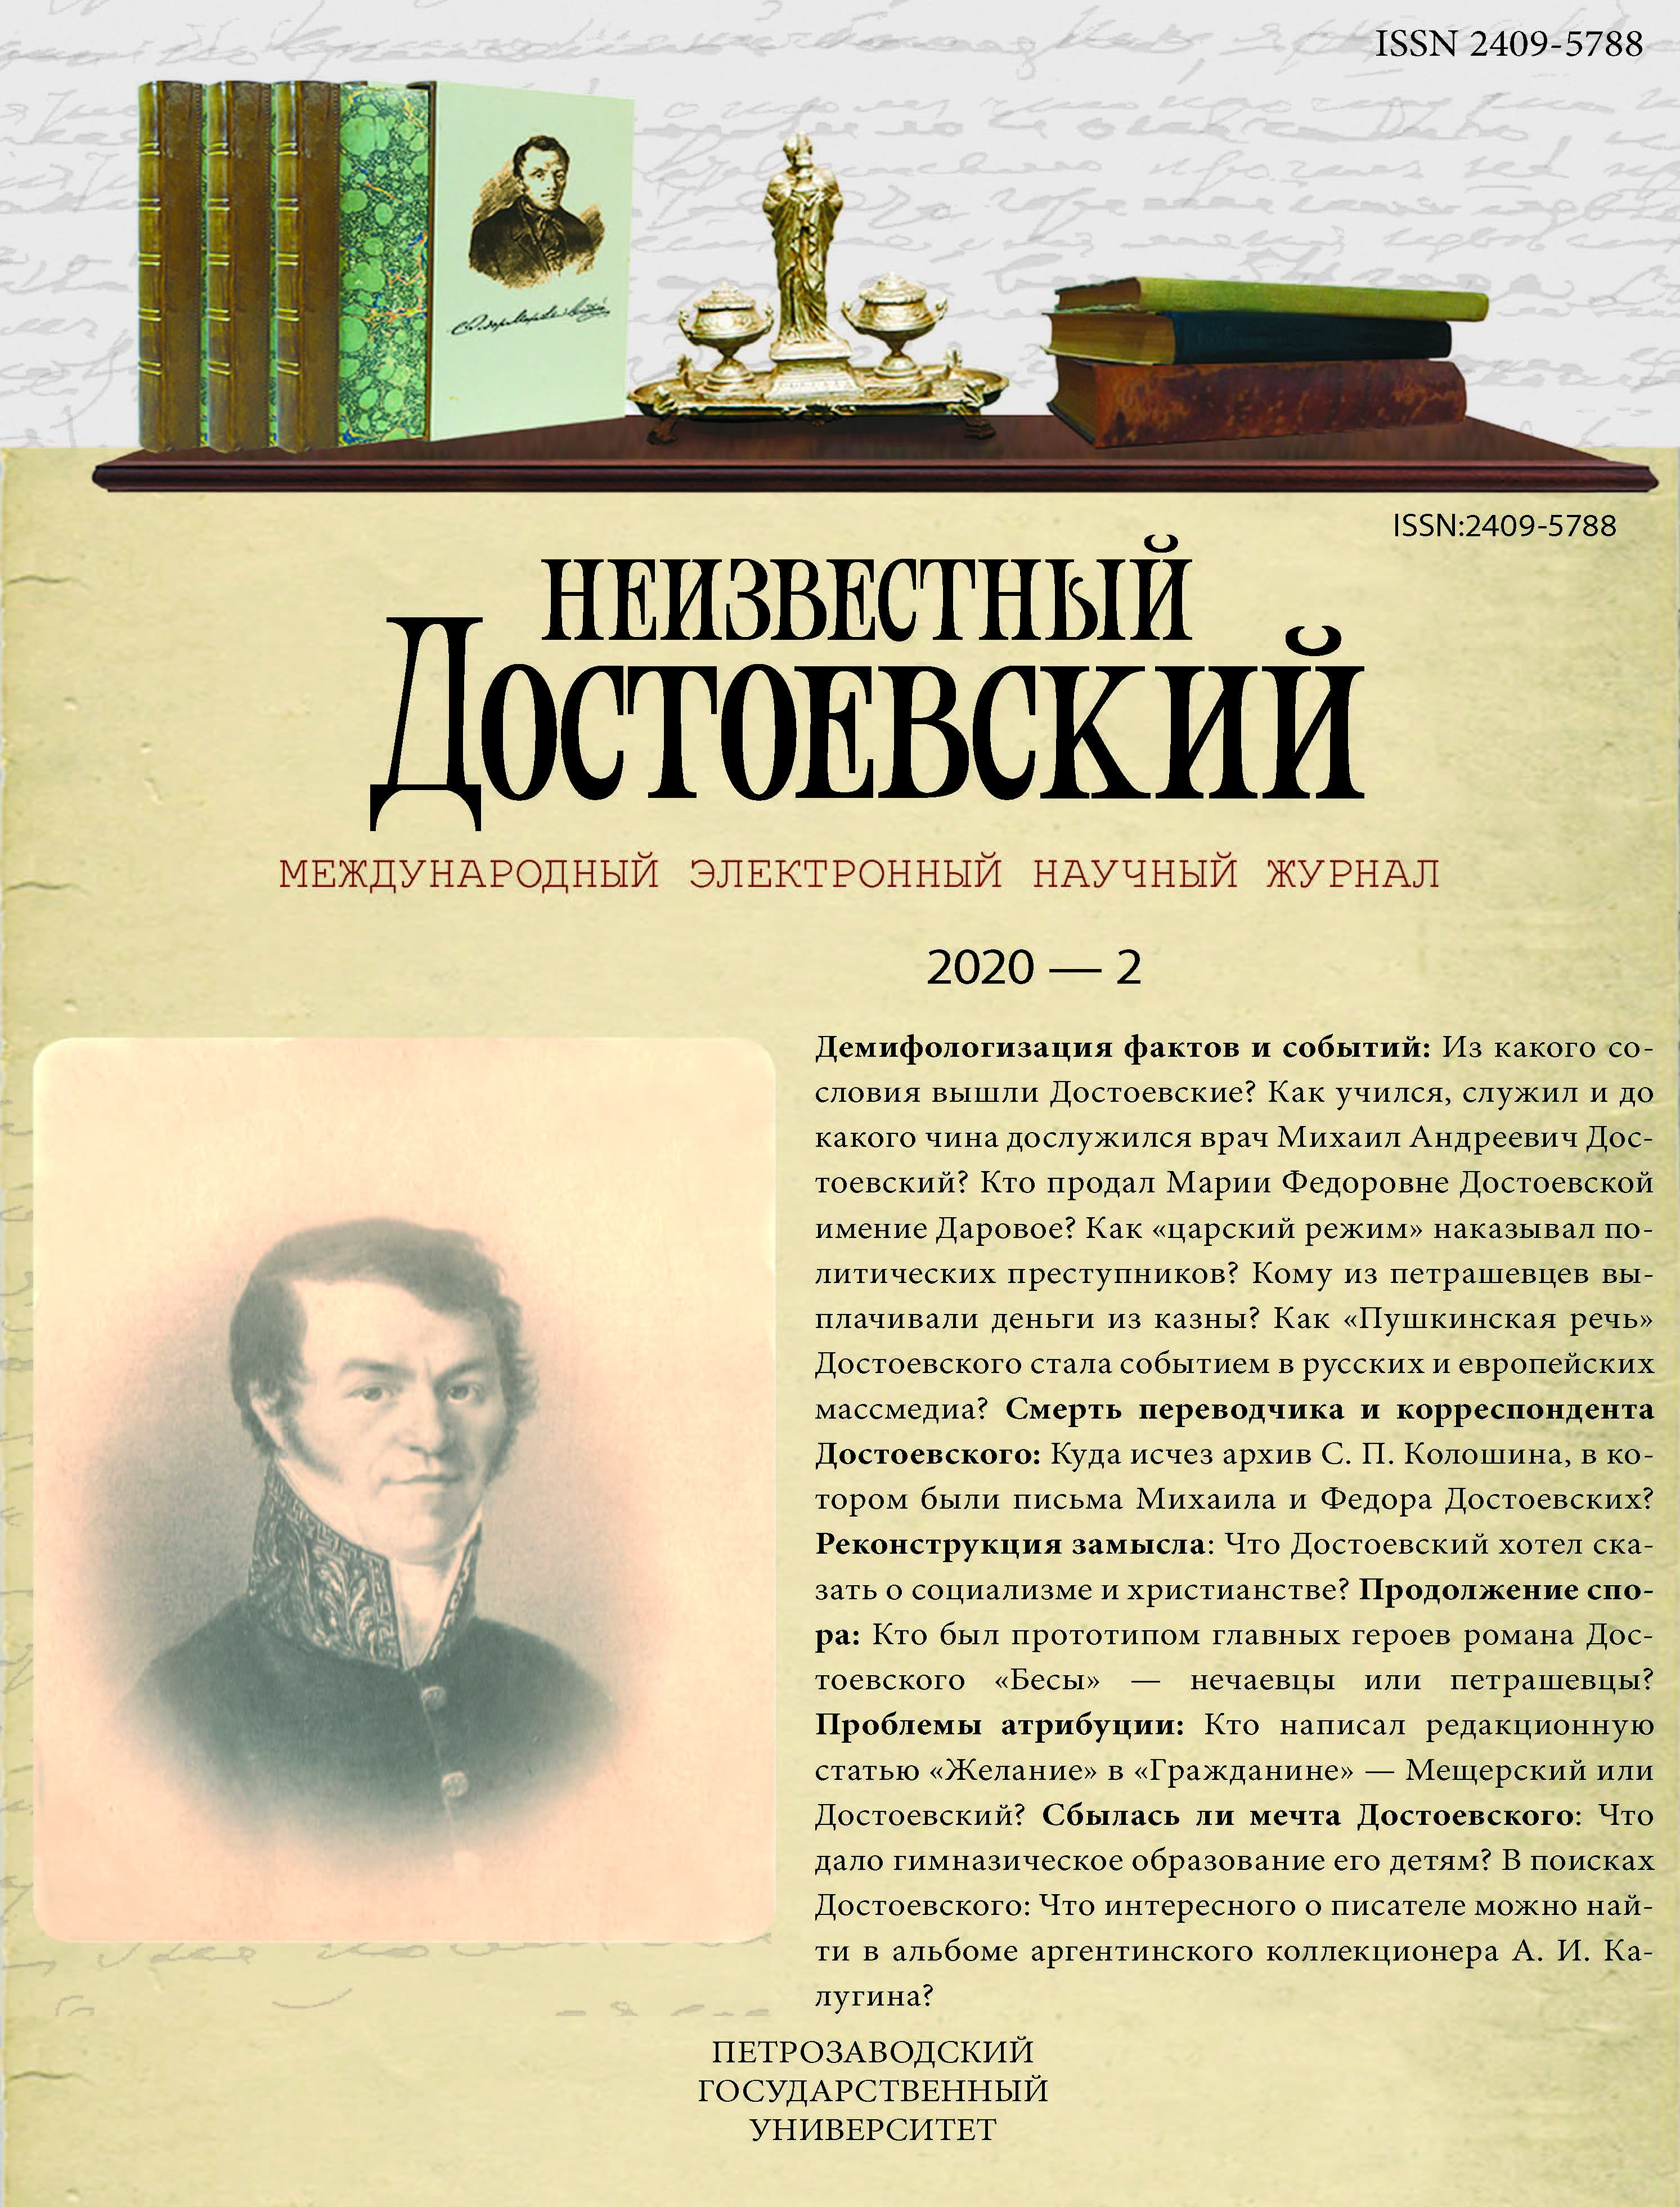 Socialism and Christianity: Problems of Attribution and Publication of Dostoevsky Cover Image